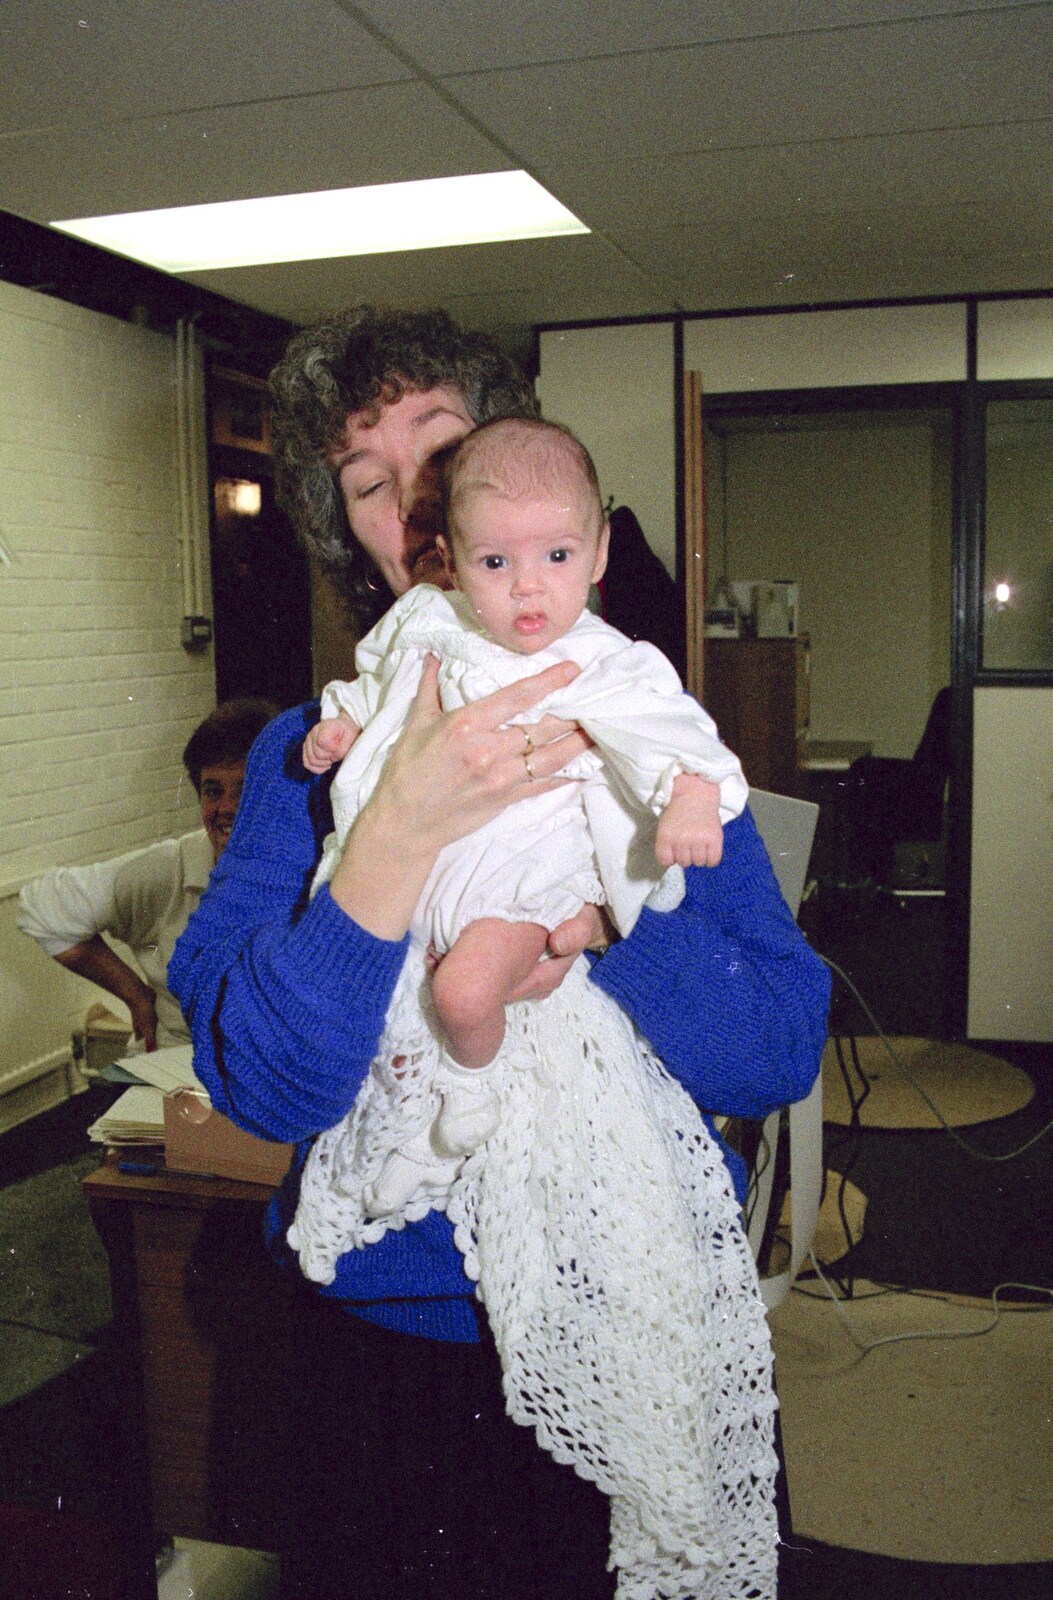 Brenda's got a random sprog in the Printec offices from Late Night, and Christmas with the Coxes, Needham, Norfolk - 25th December 1989